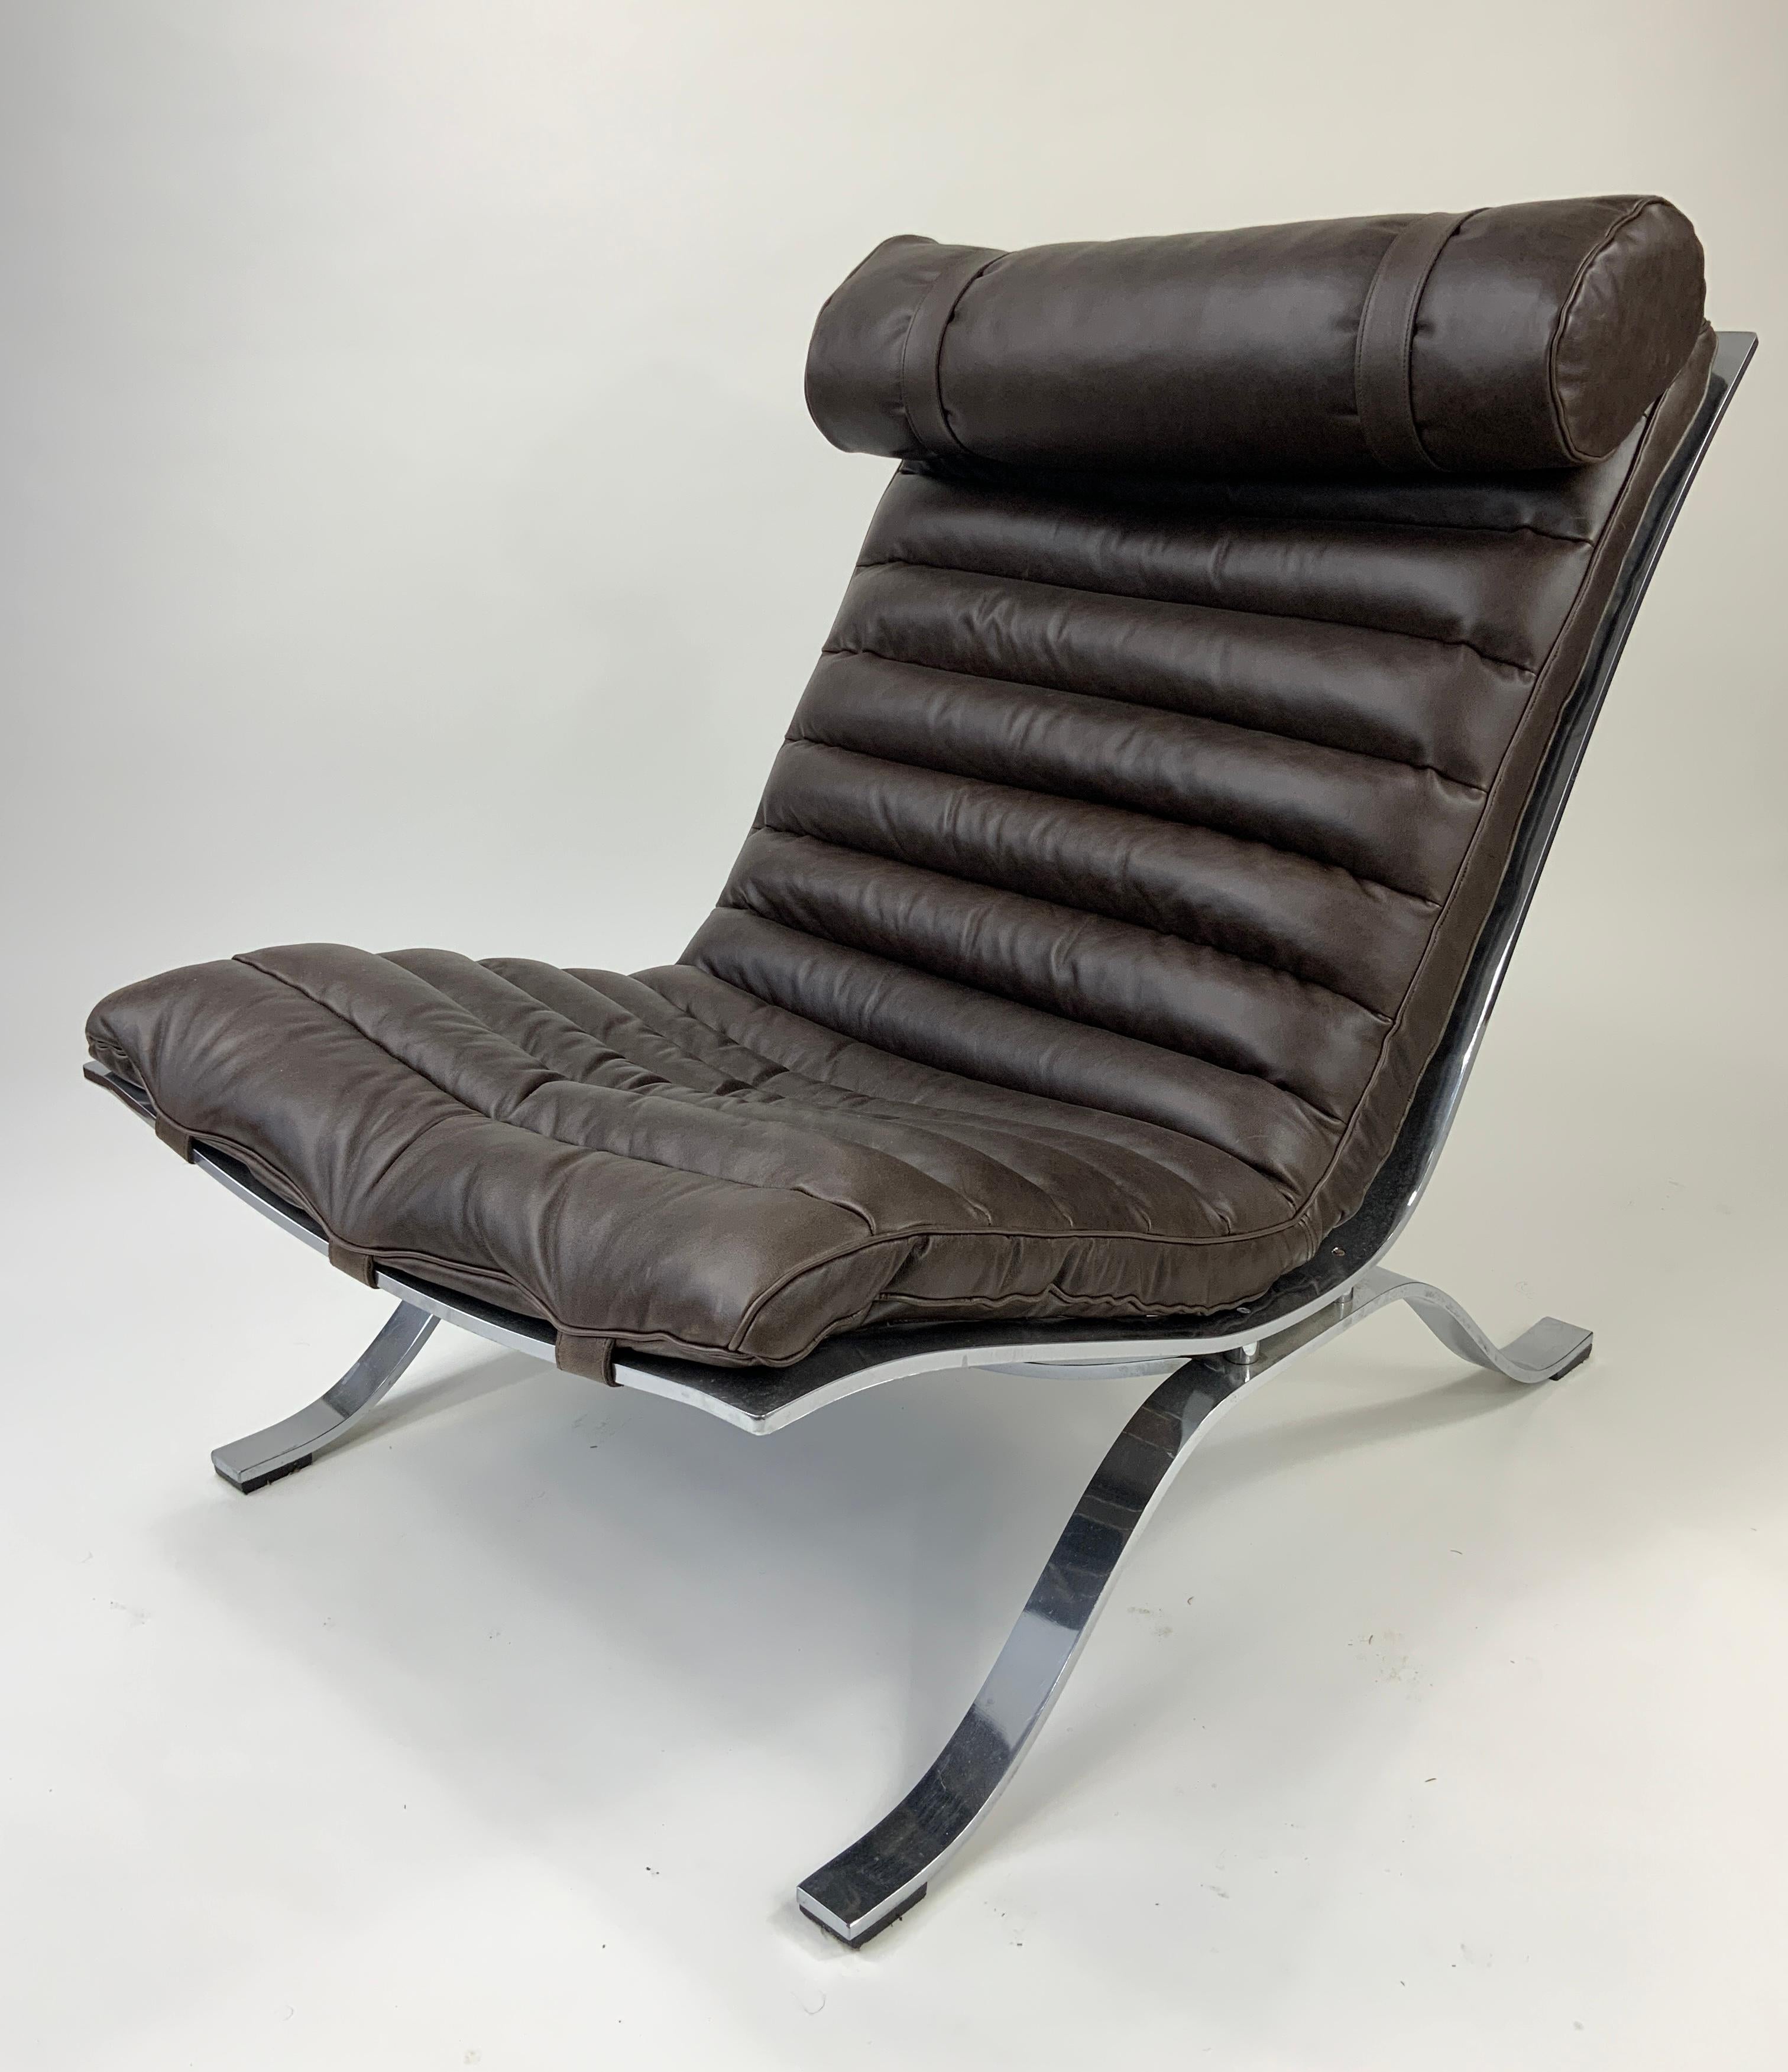 Original Arne Norell “ARI” lounge chair with matching ottoman, 1970’s. Designed in 1966, the Ari was awarded “Showpiece of the year in 1973 by the British Furniture Manufacturers in London. It is considered as Norell’s most beautiful and luxurious